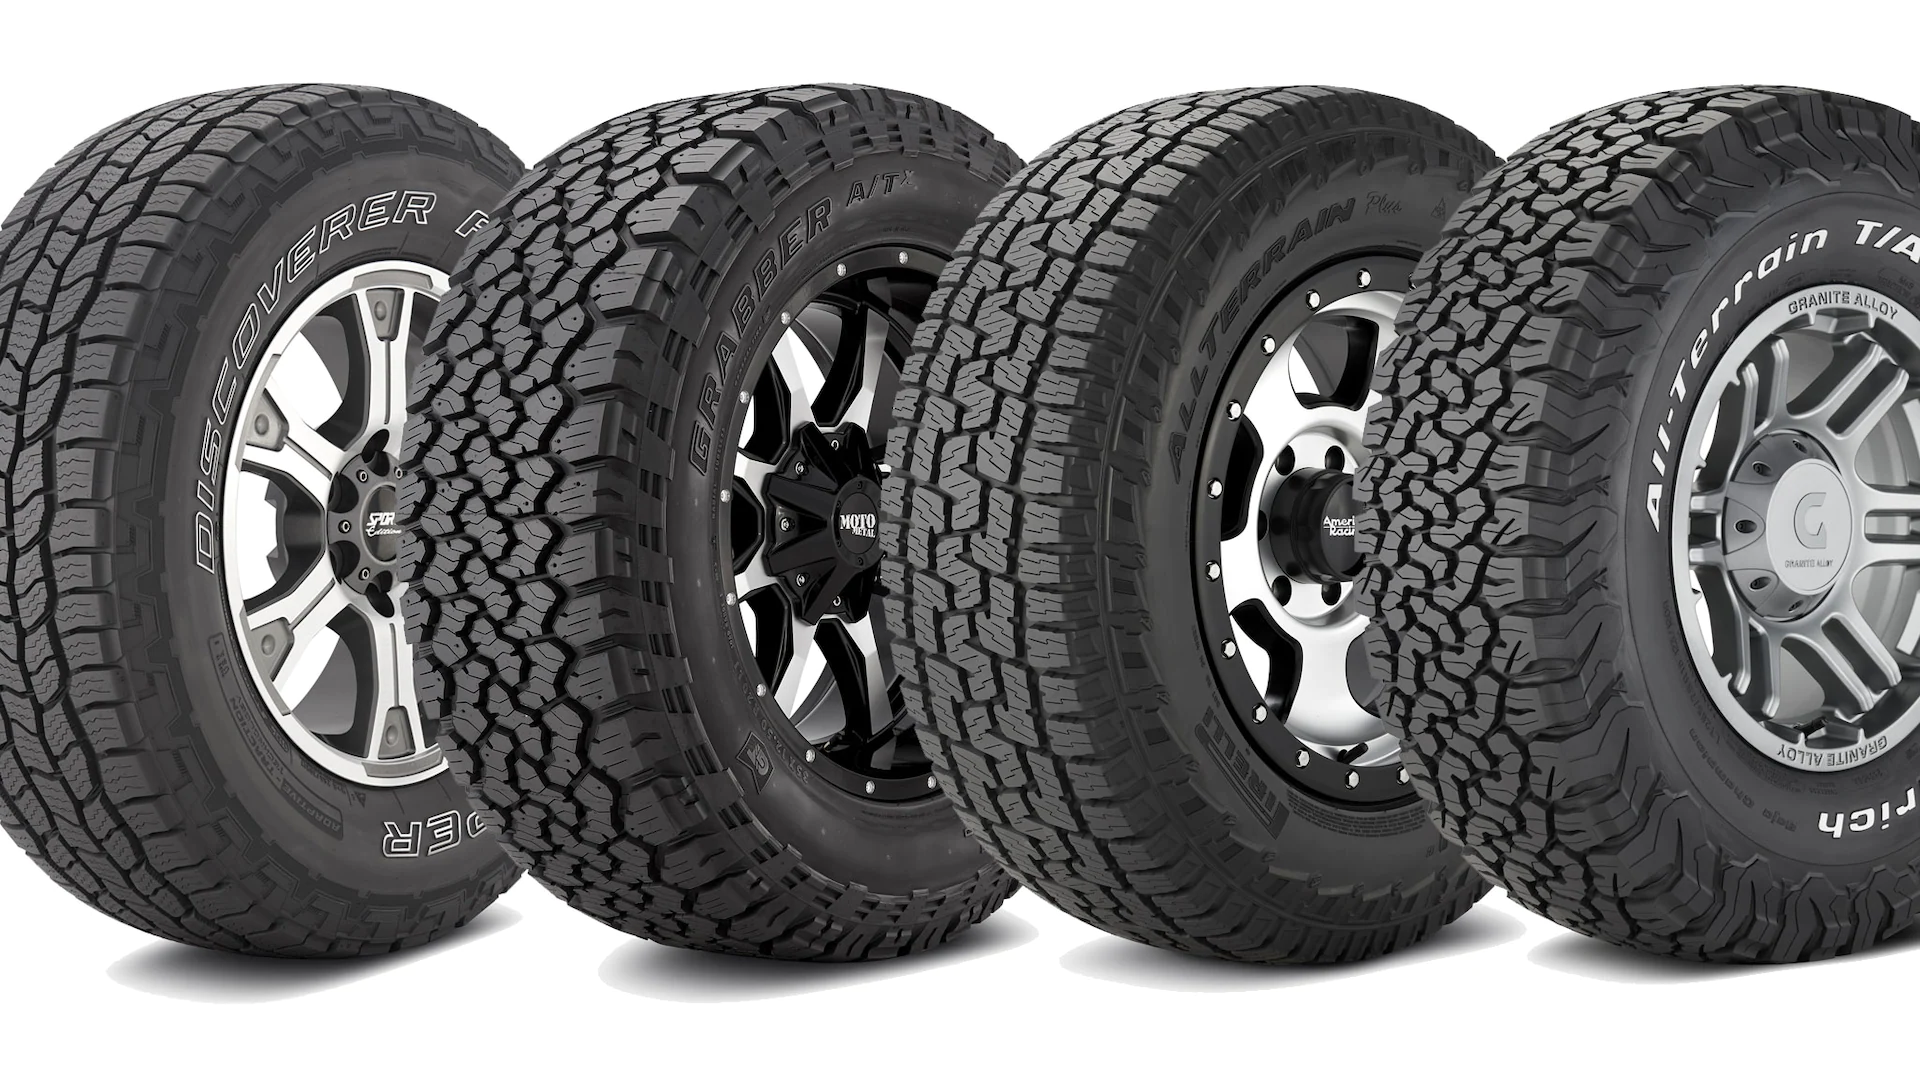 Best off-road tires for Ford F150